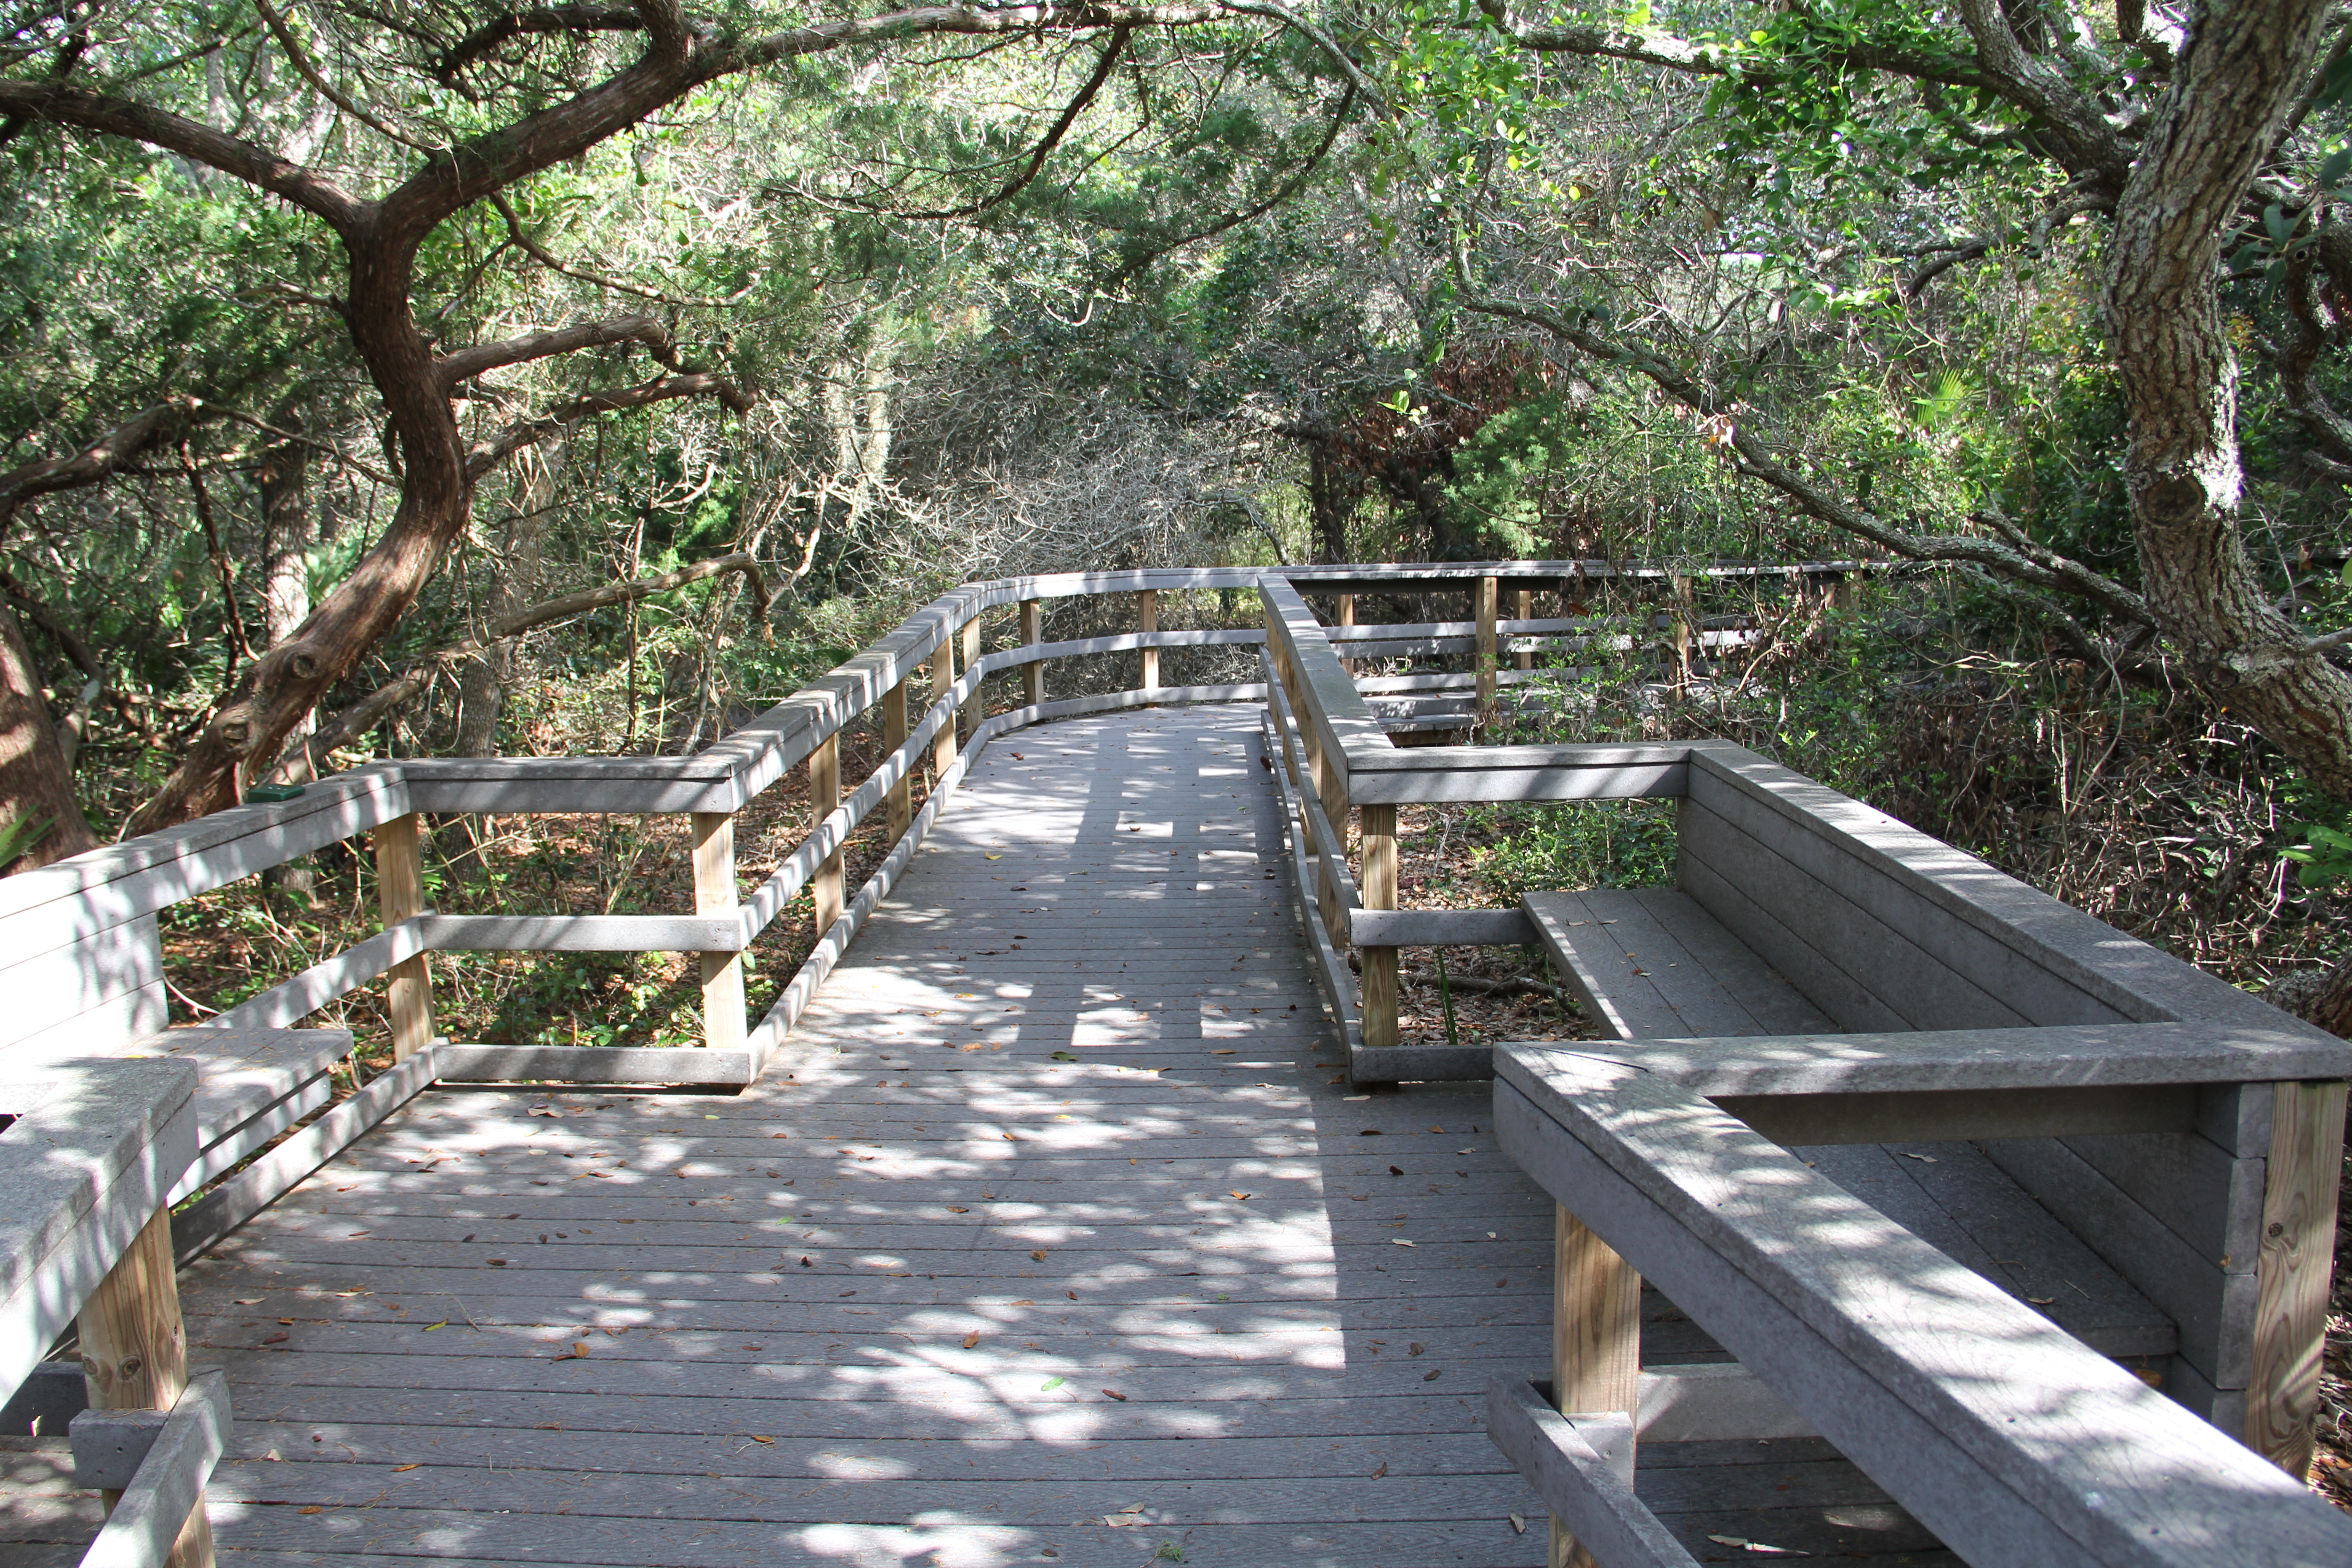 A nature trail boardwalk with seating area.